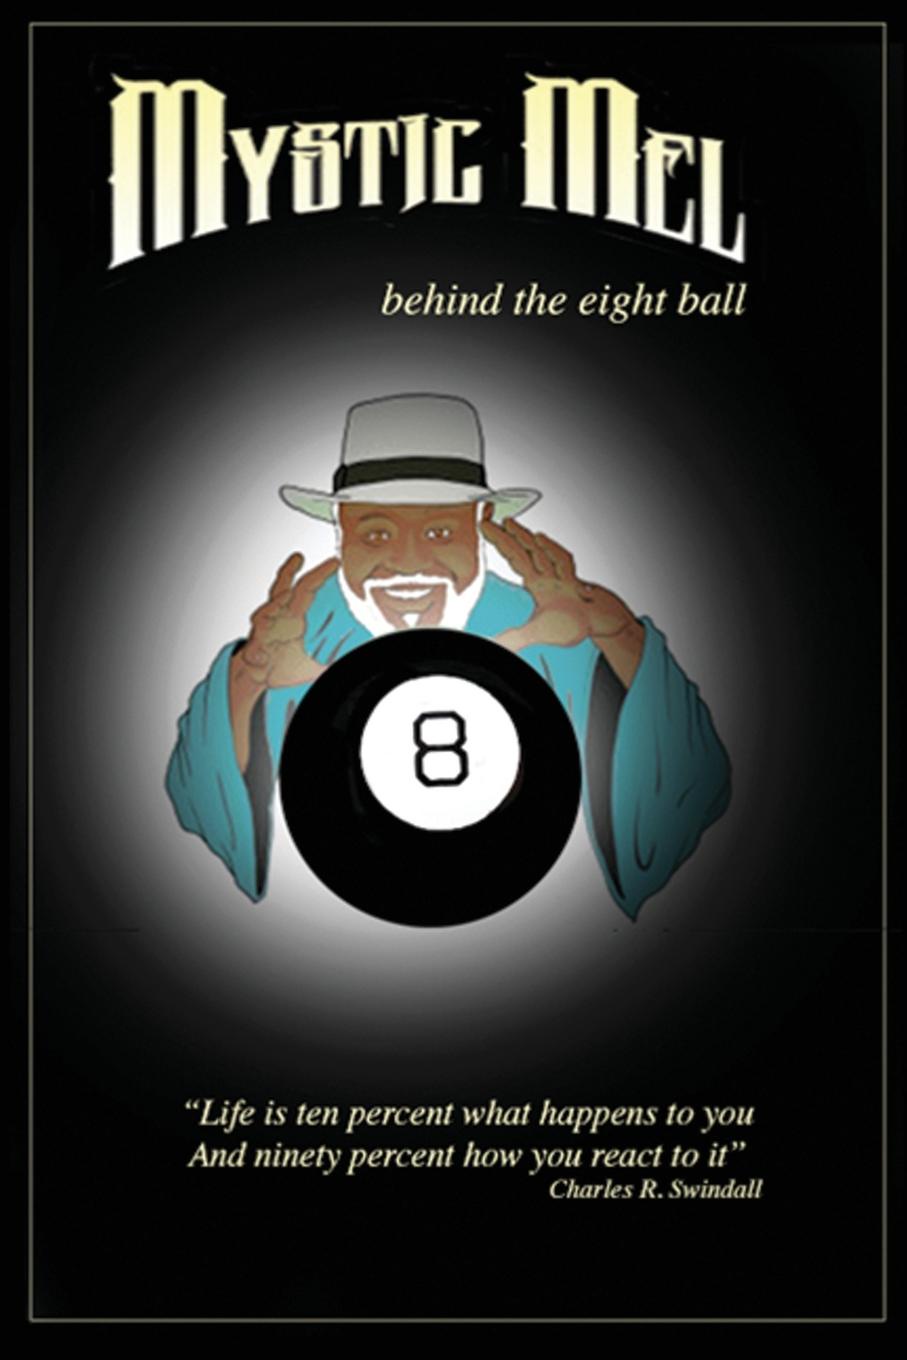 Behind the Eight Ball. The Marvelous Misadventures of Mystic Mel